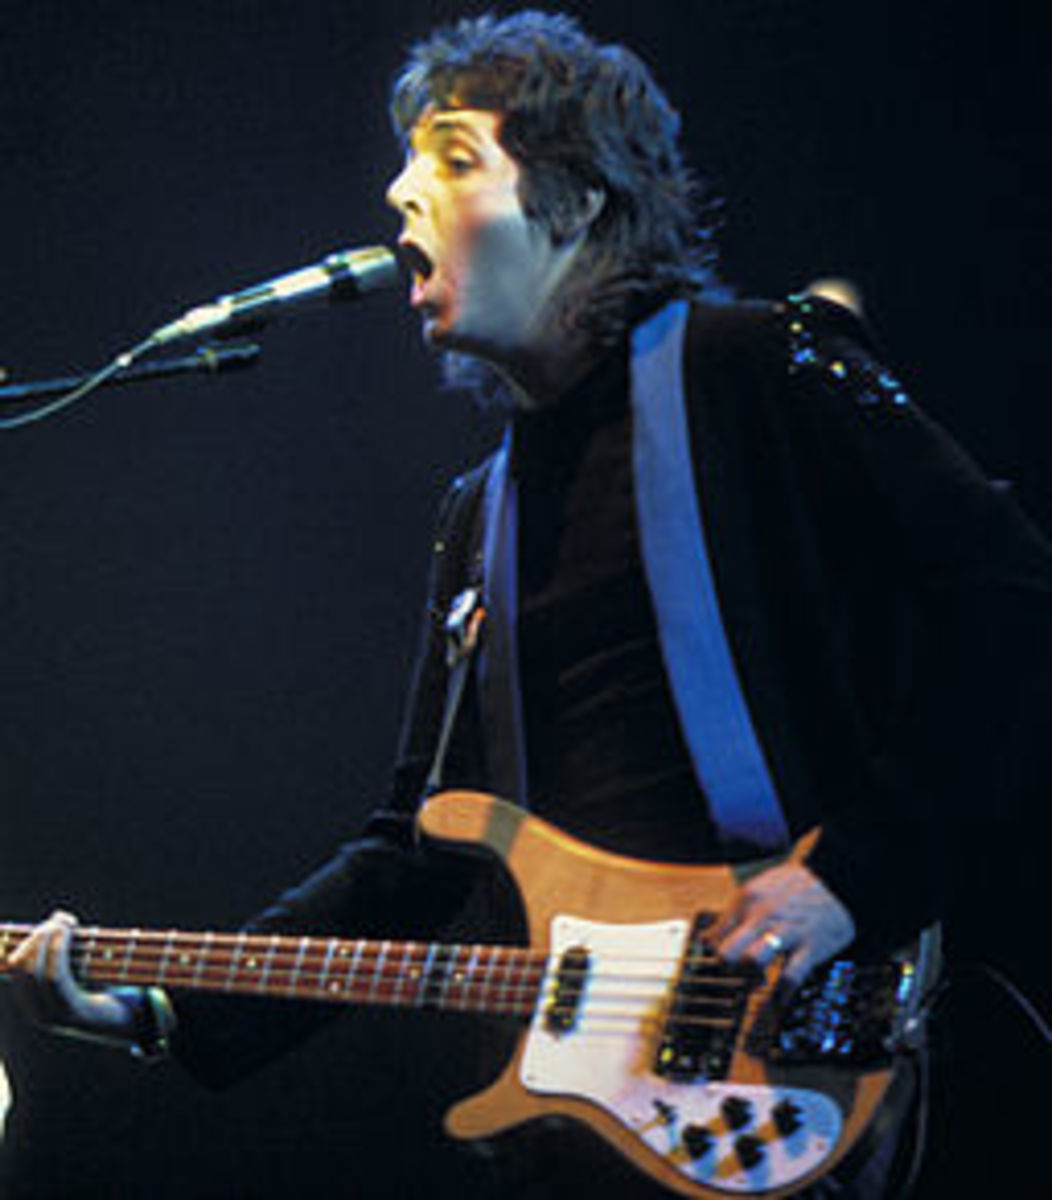 Sir Paul McCartney, one of the most famous bass players